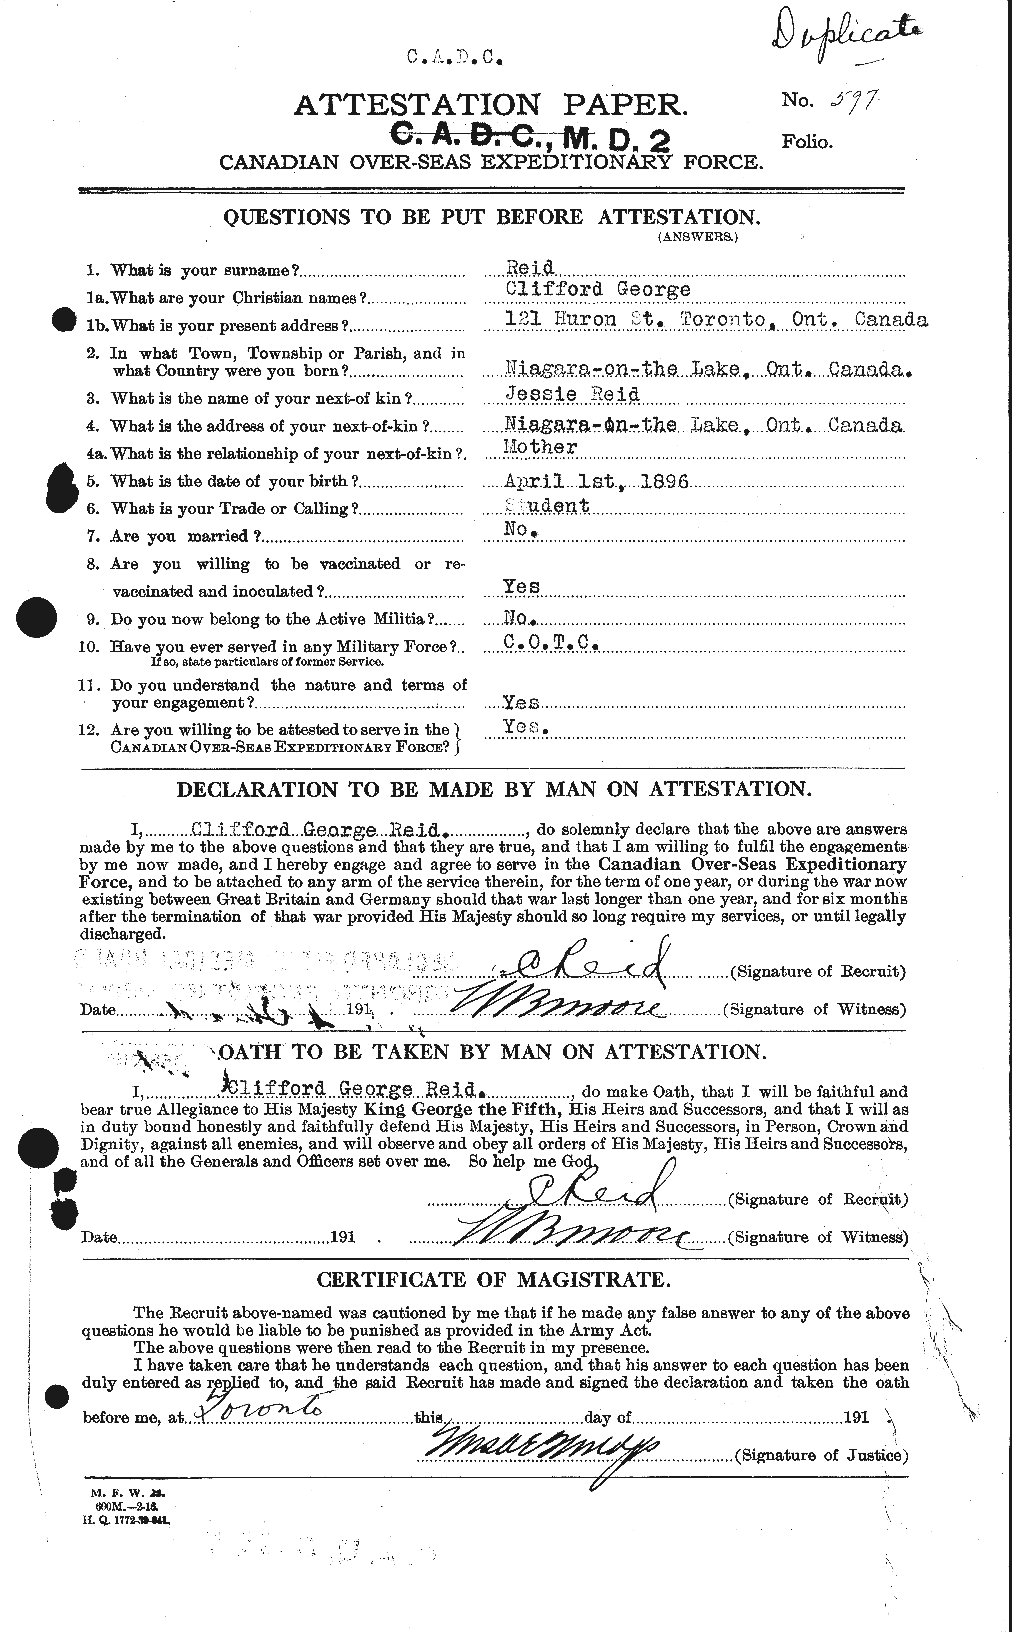 Personnel Records of the First World War - CEF 597912a